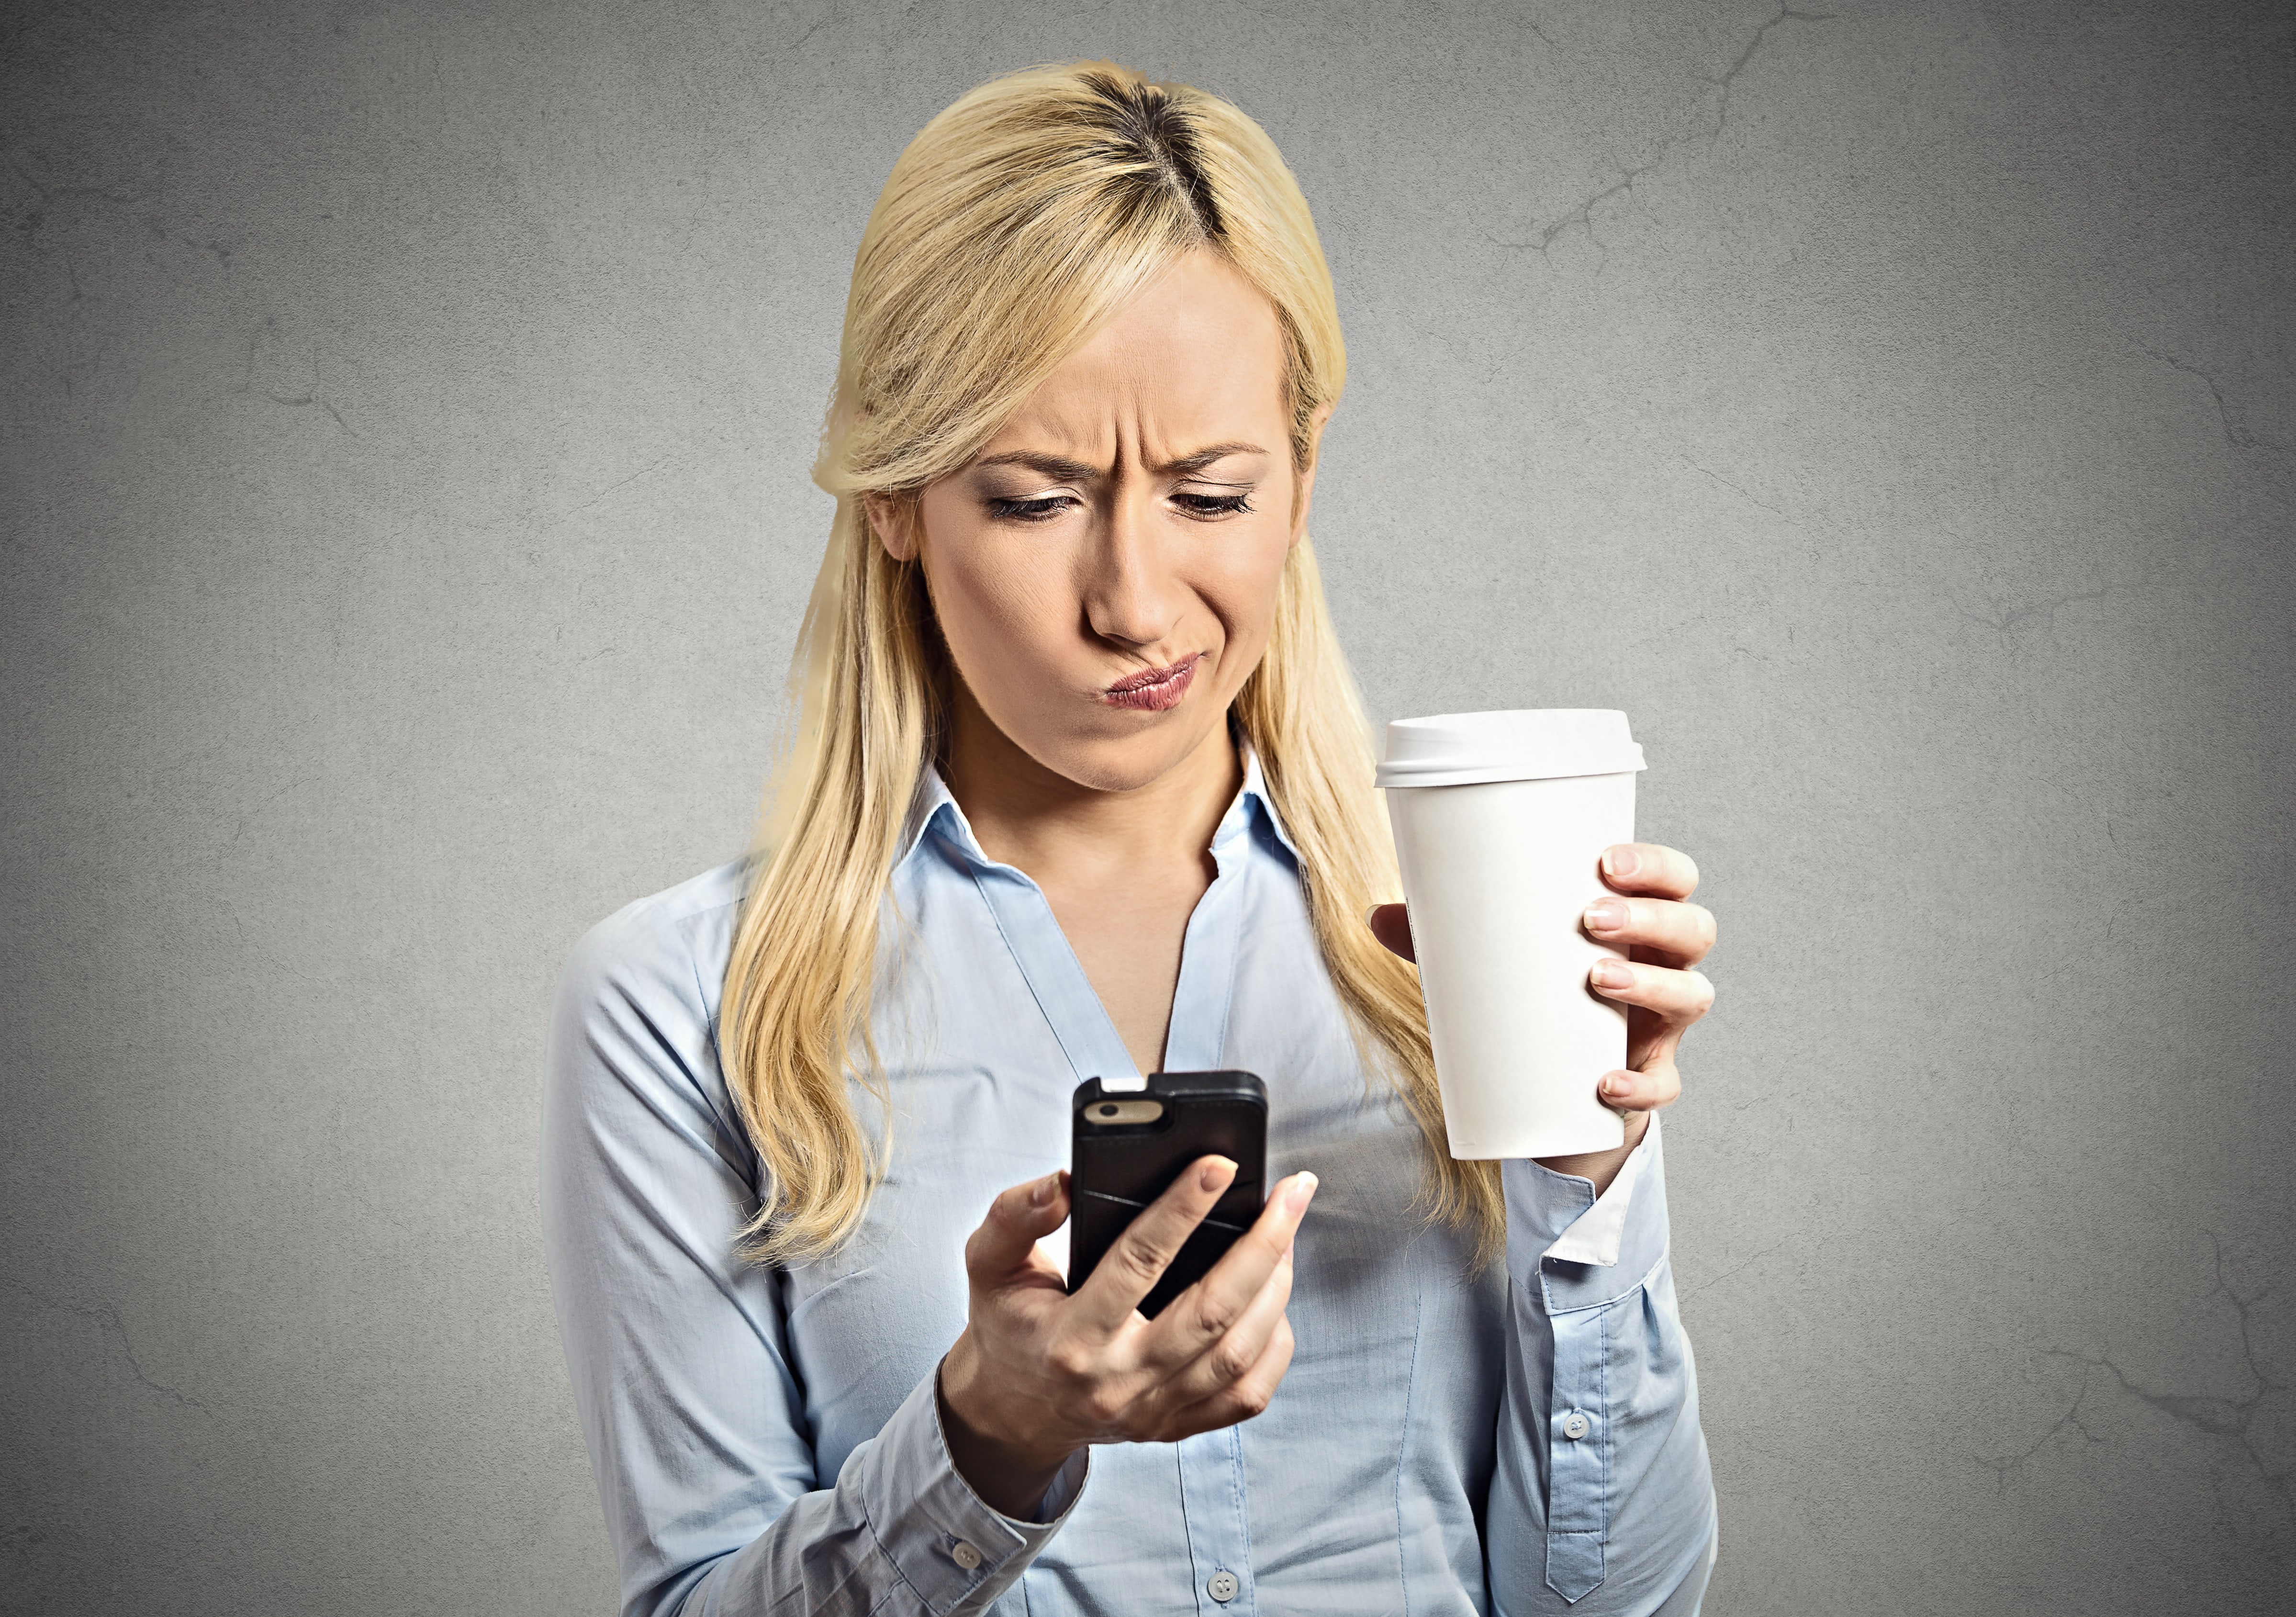 5 Ways Texting Can Ruin Your Love Life